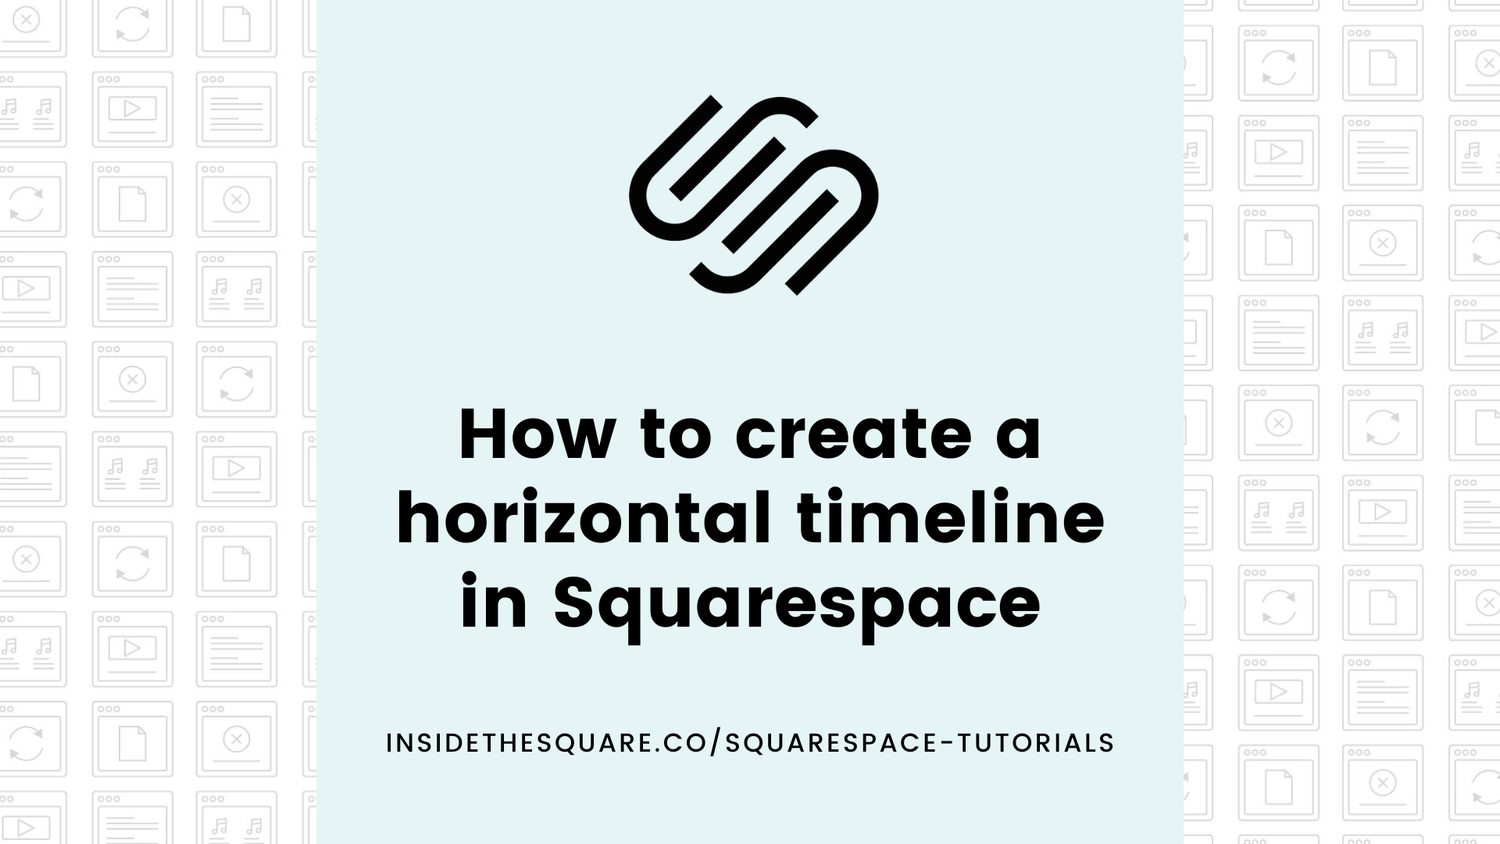 28 How To Make A Timeline In Squarespace
10/2022